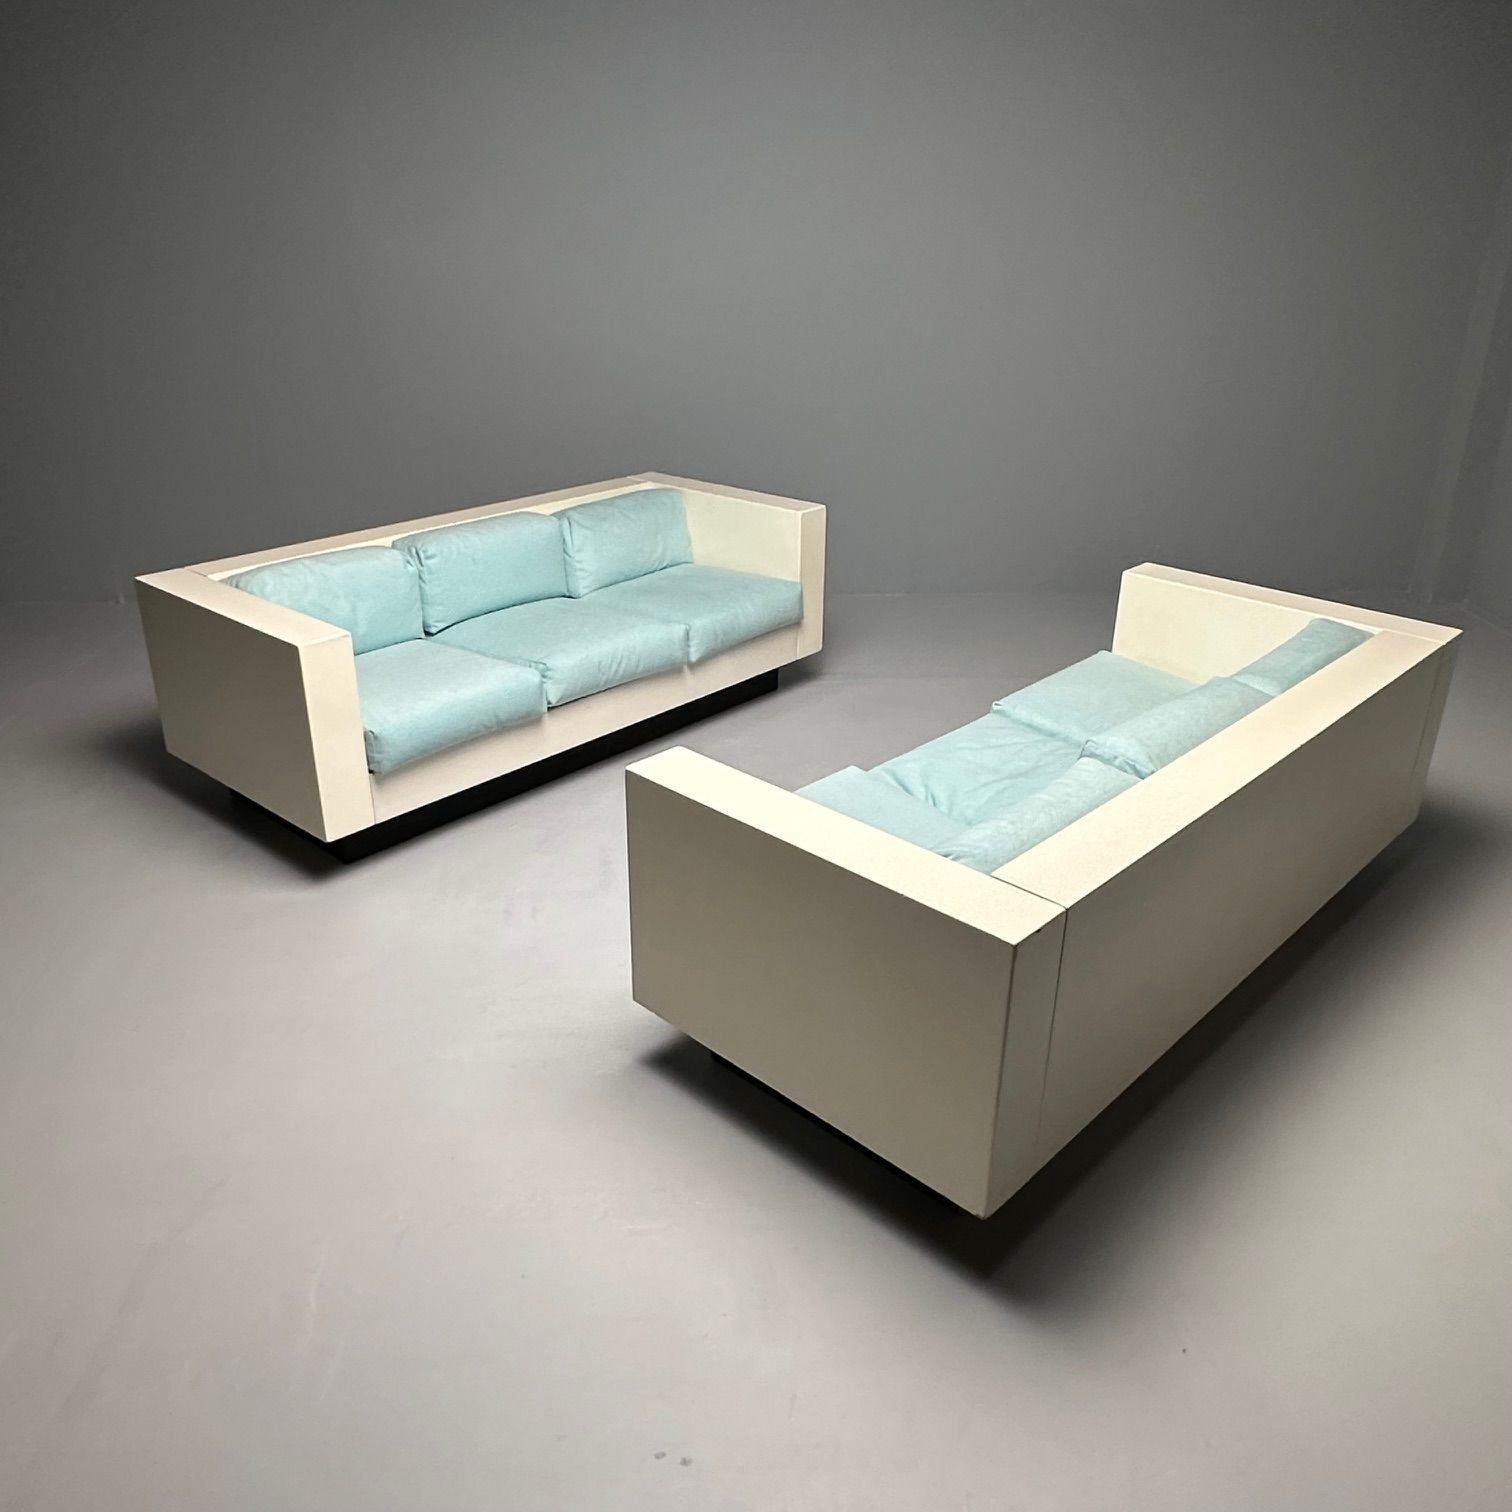 Massimo and Lella Vignelli for Poltronova, pair of 'Saratoga' three-seat sofas, Polyester Lacquer and Fabric, Italy, 1964

Priced per the pair. You may purchase one if only one is needed. Newly re-upholstered in plush velvet turquoise